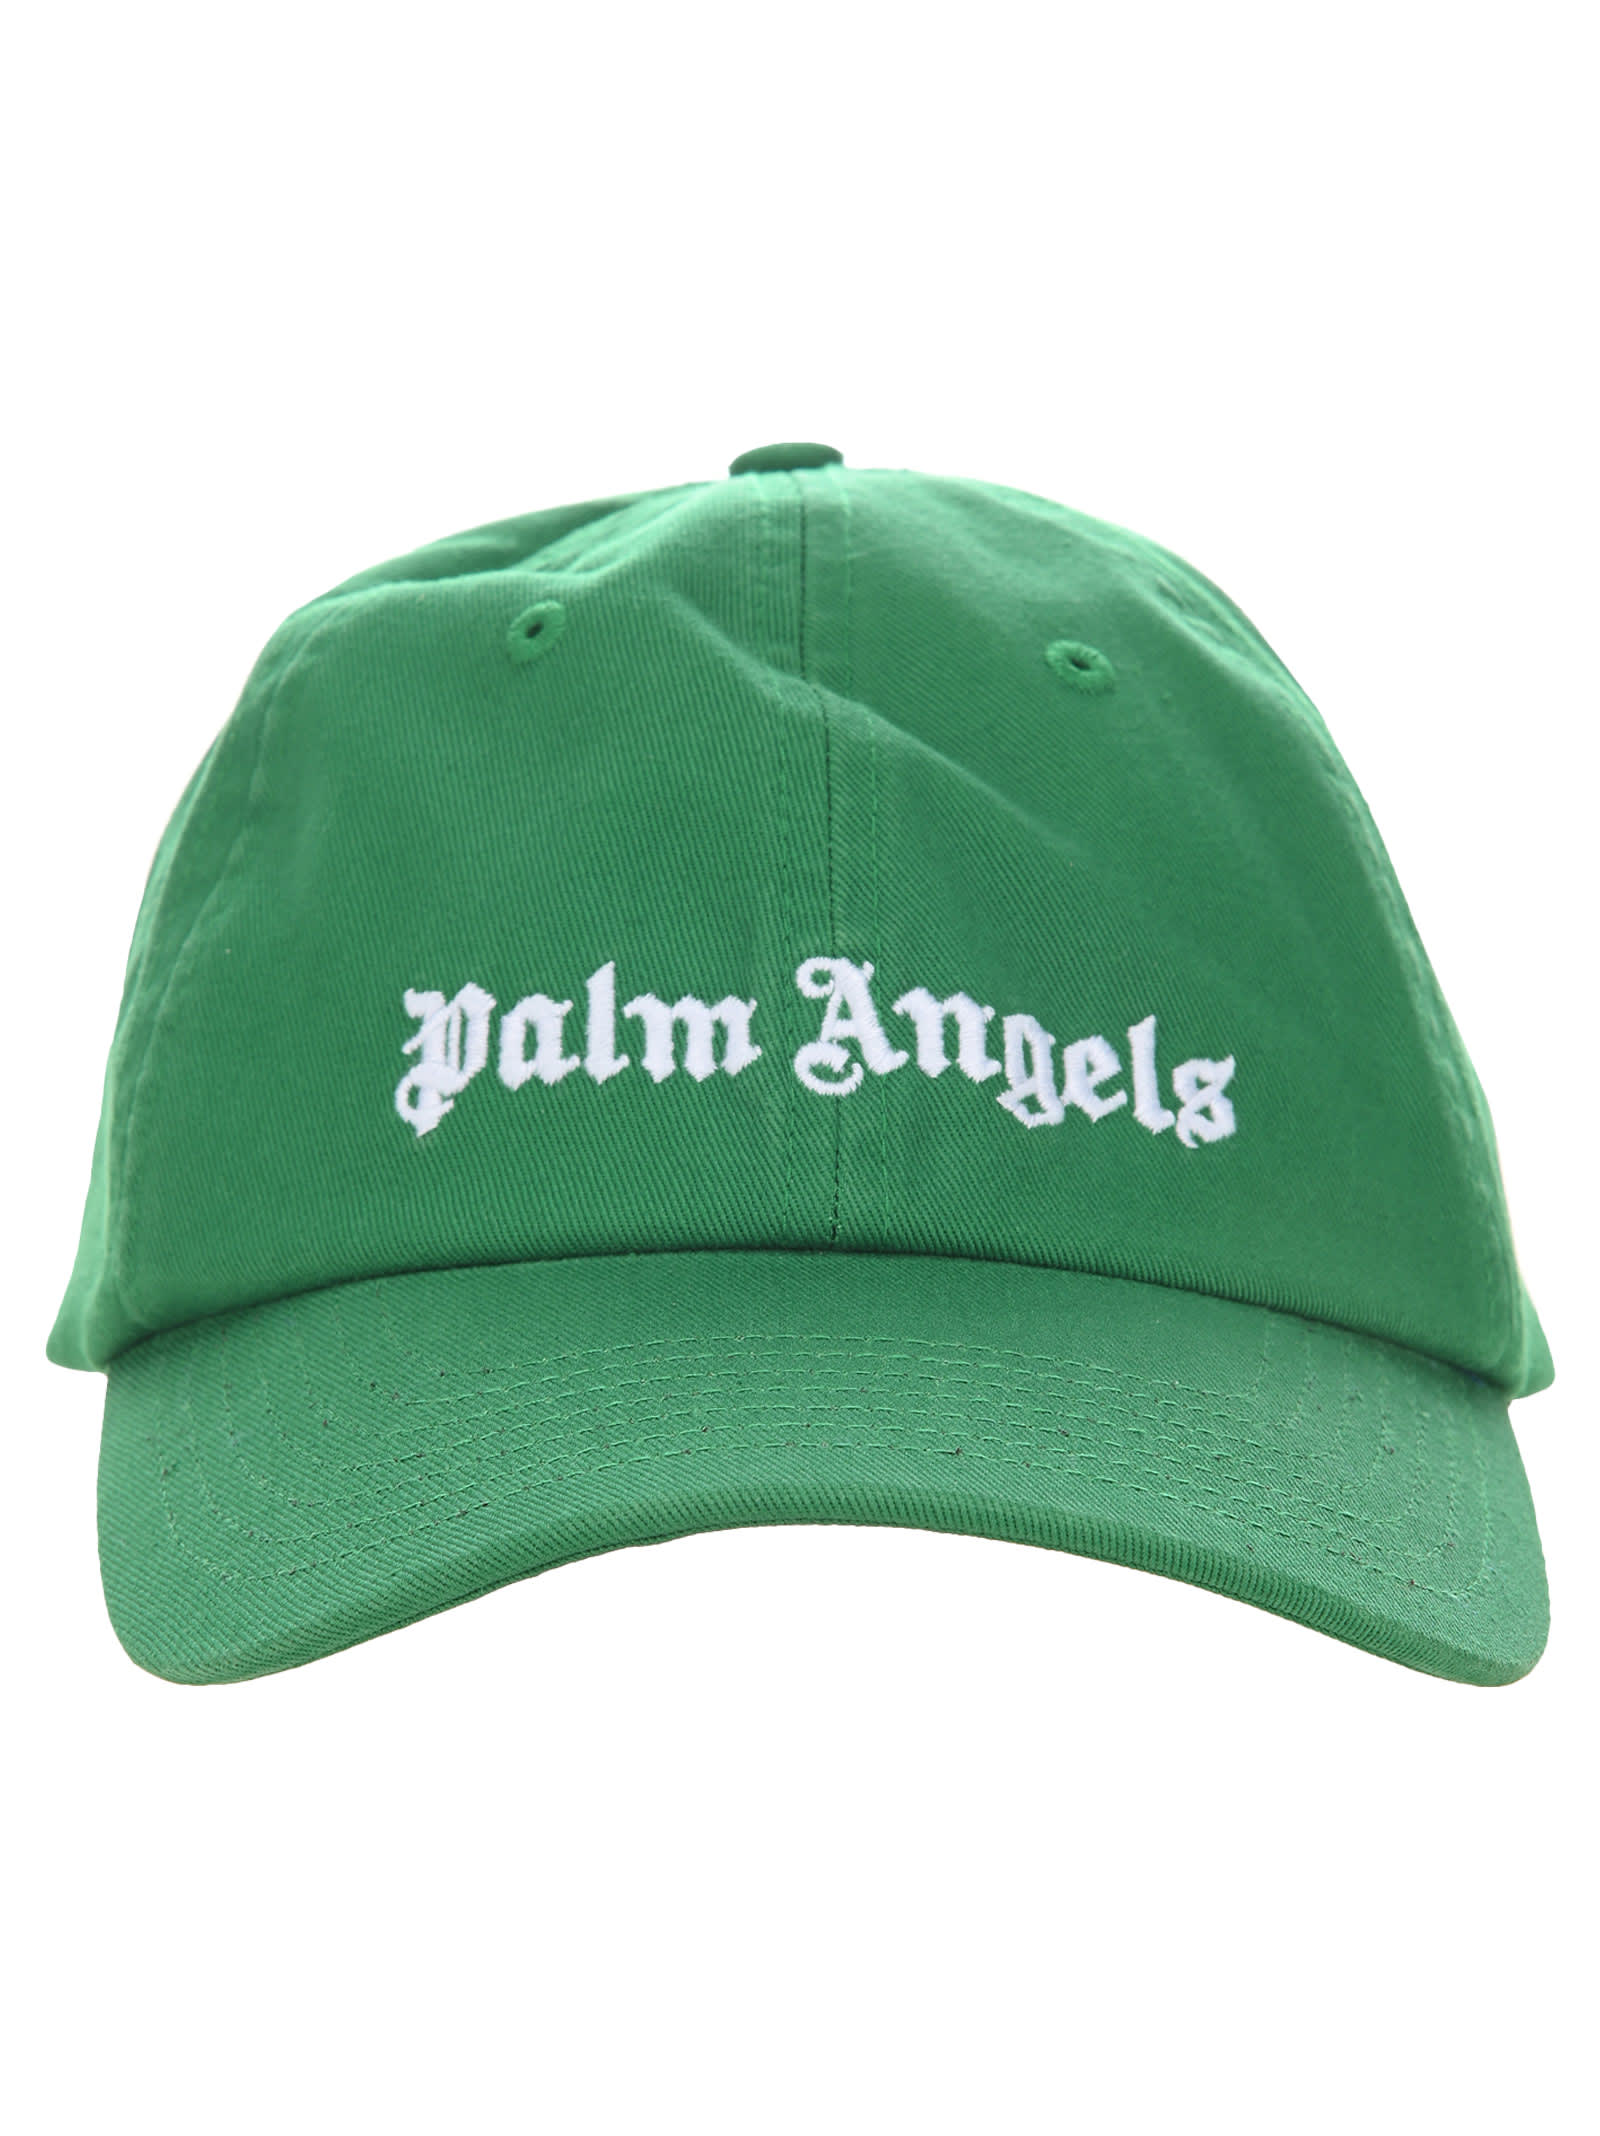 Palm Angels Logo Cap By Palm Angels.